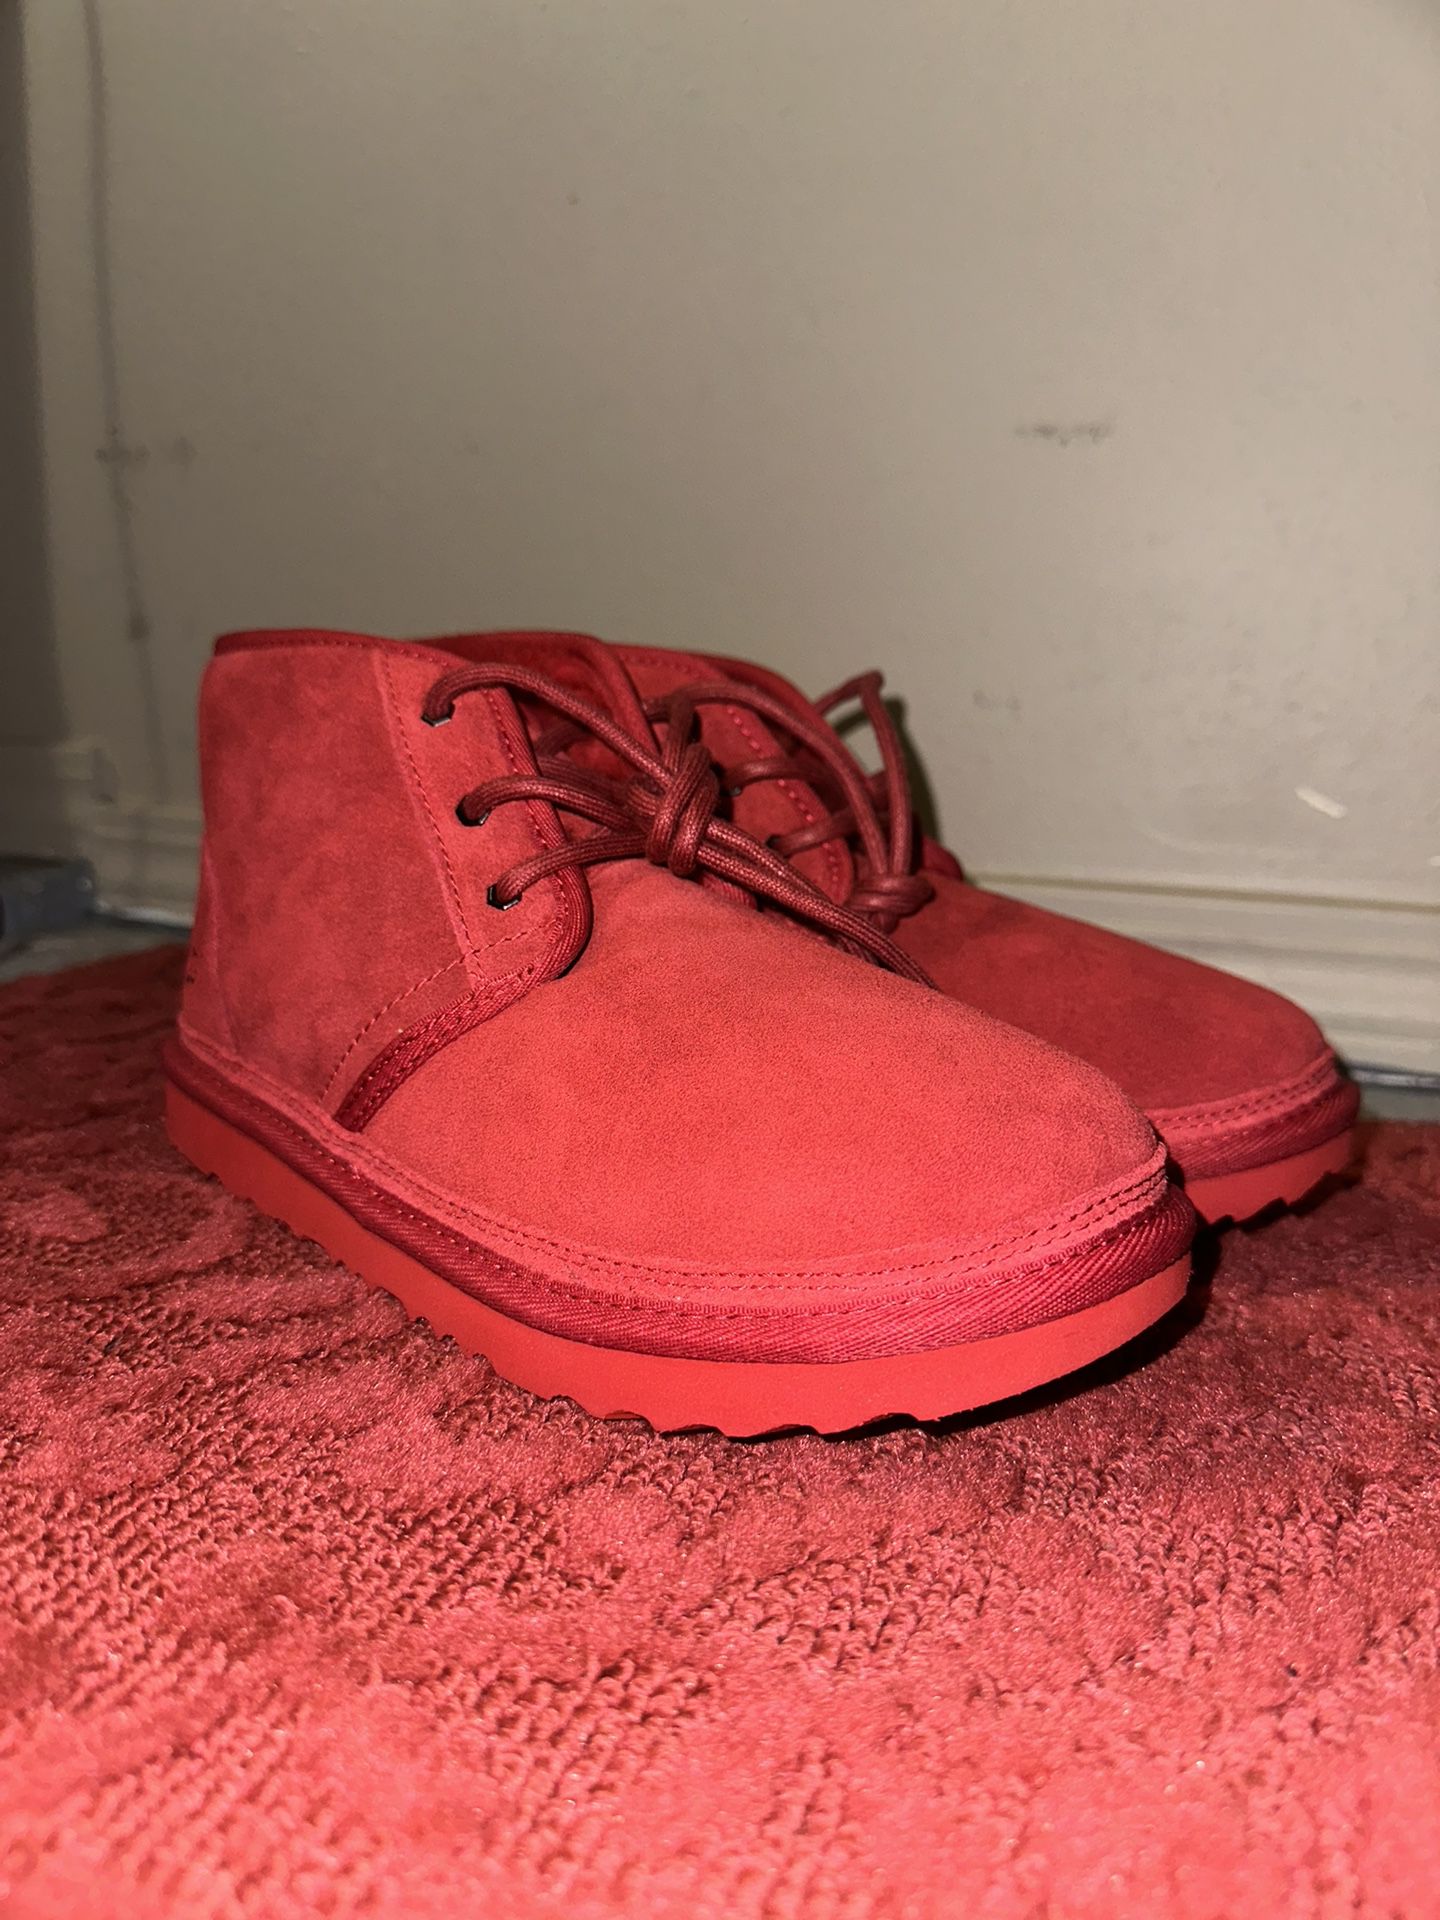 Womens Red Ugg Boots (Brand New) Sz 6 